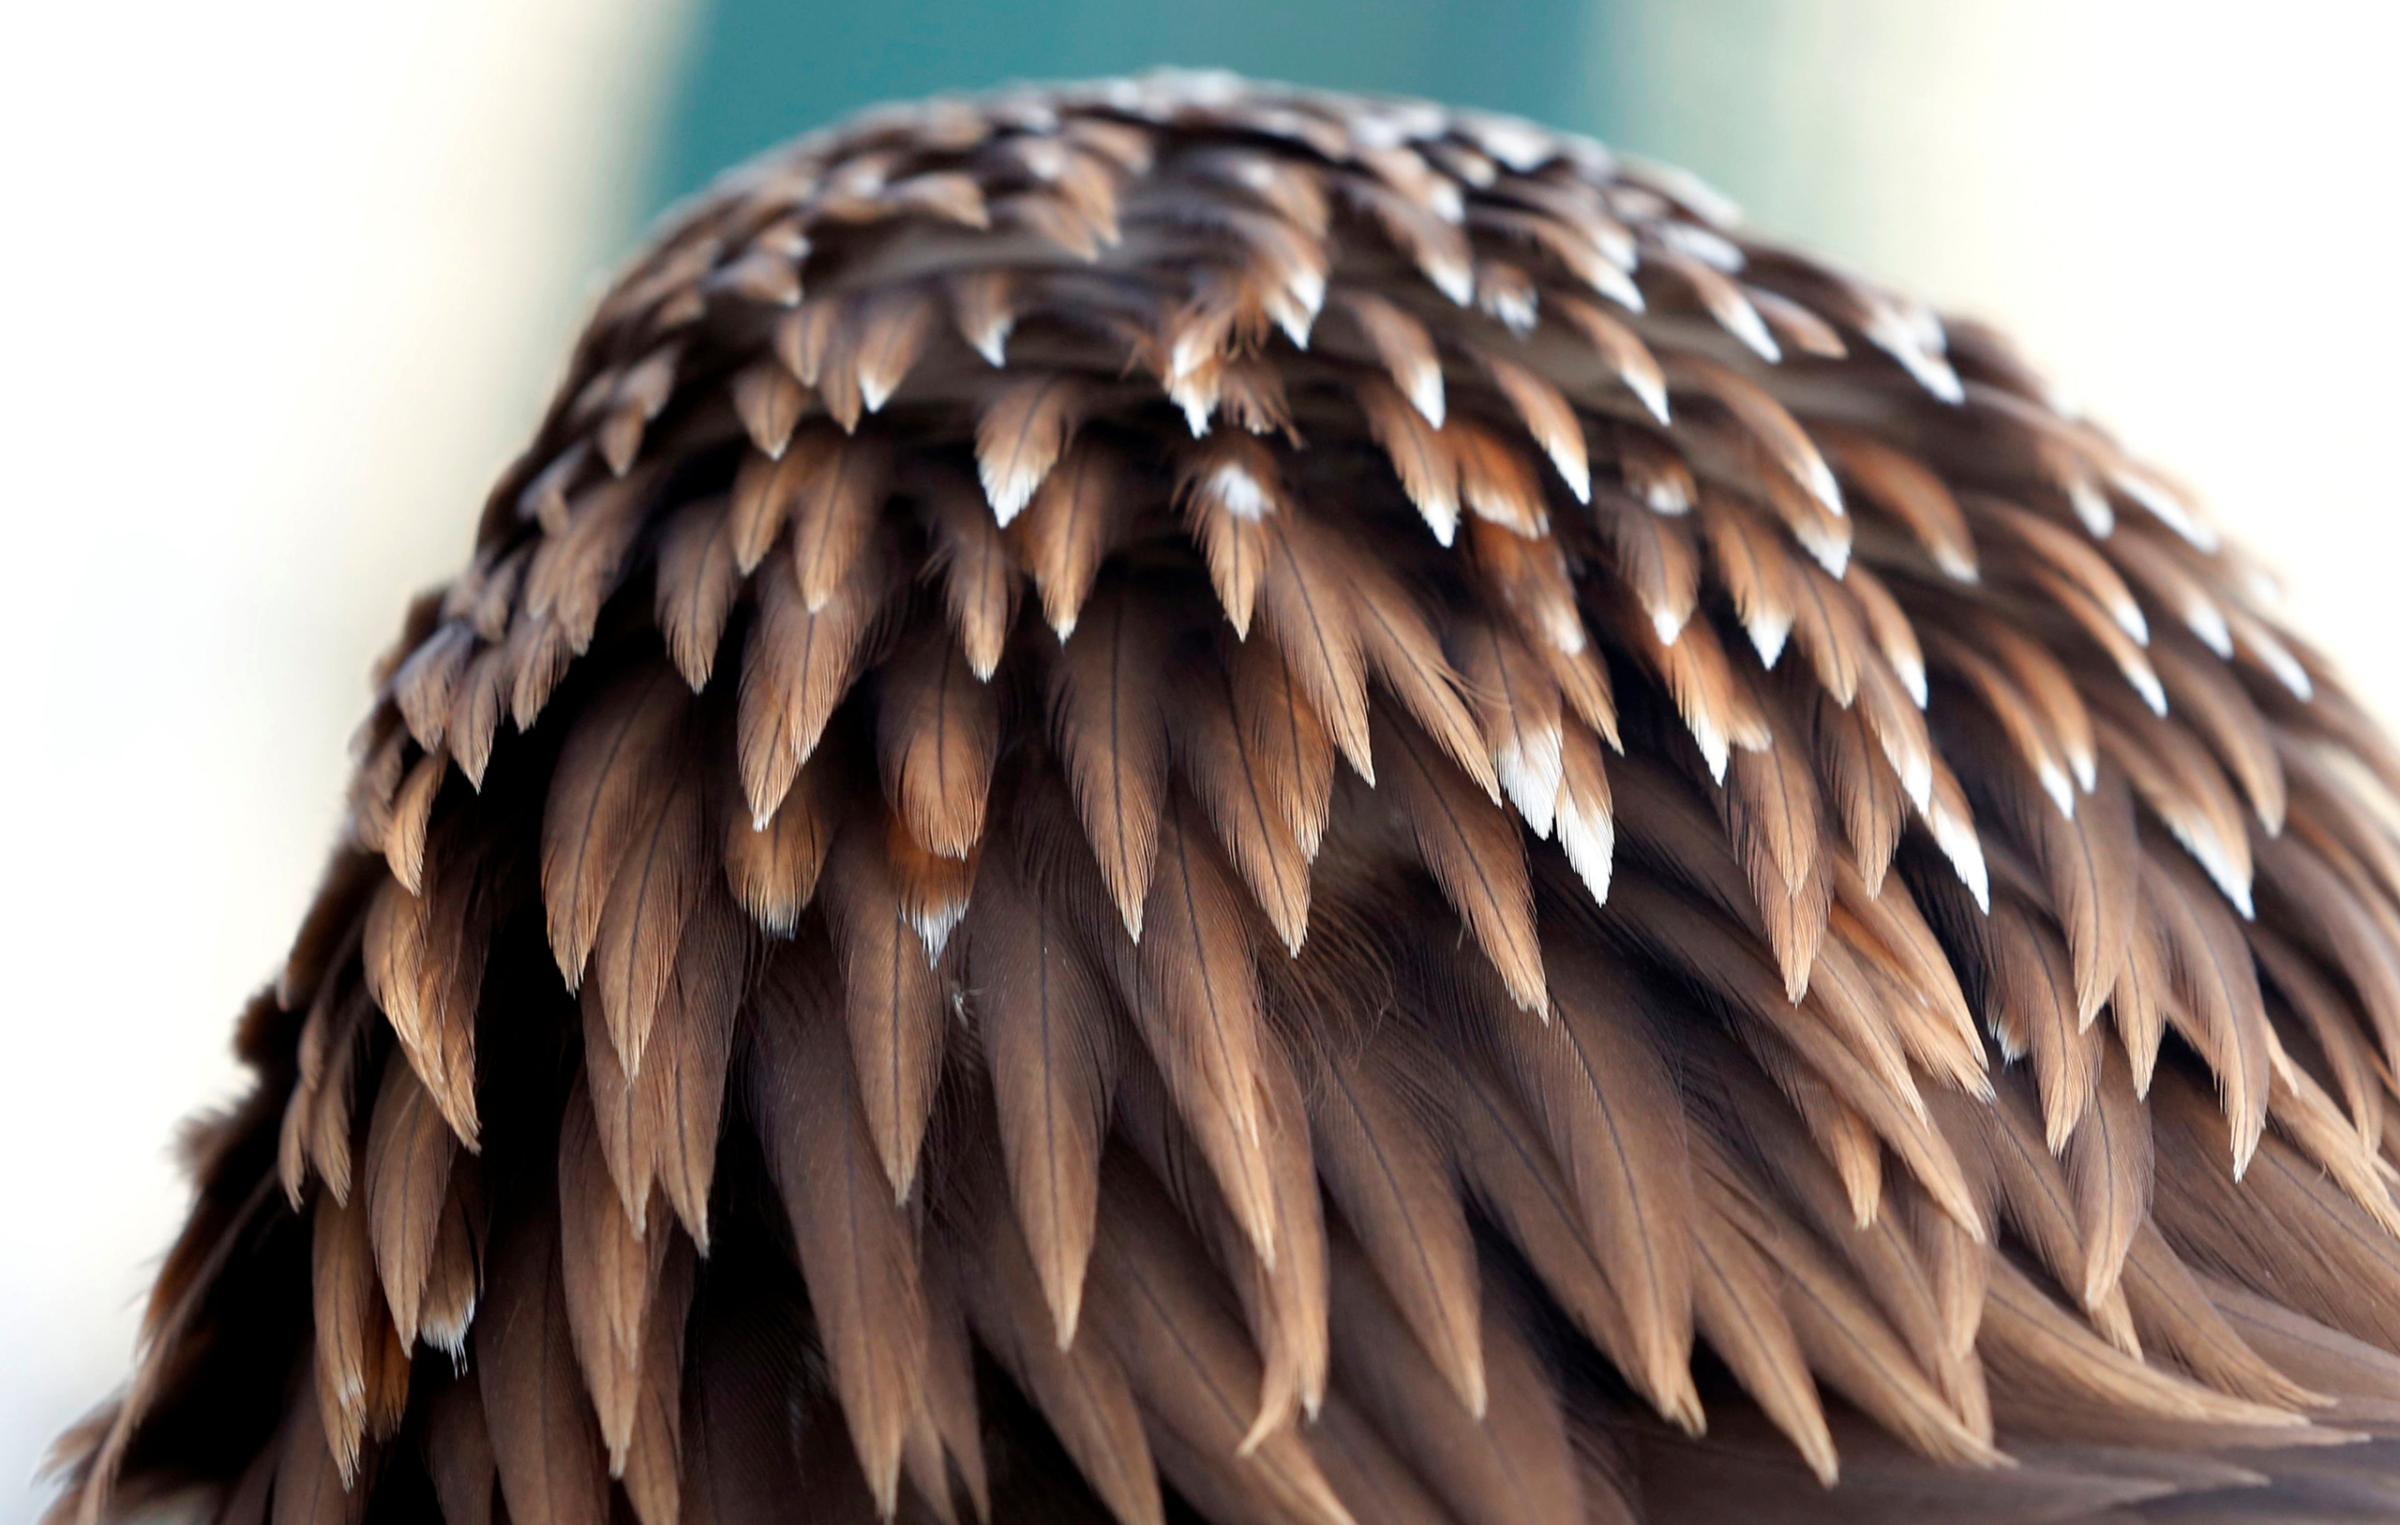 Feathers of golden eagle are pictured as part of a military training for combat against drones in Mont-de-Marsan French Air Force base, Southwestern France